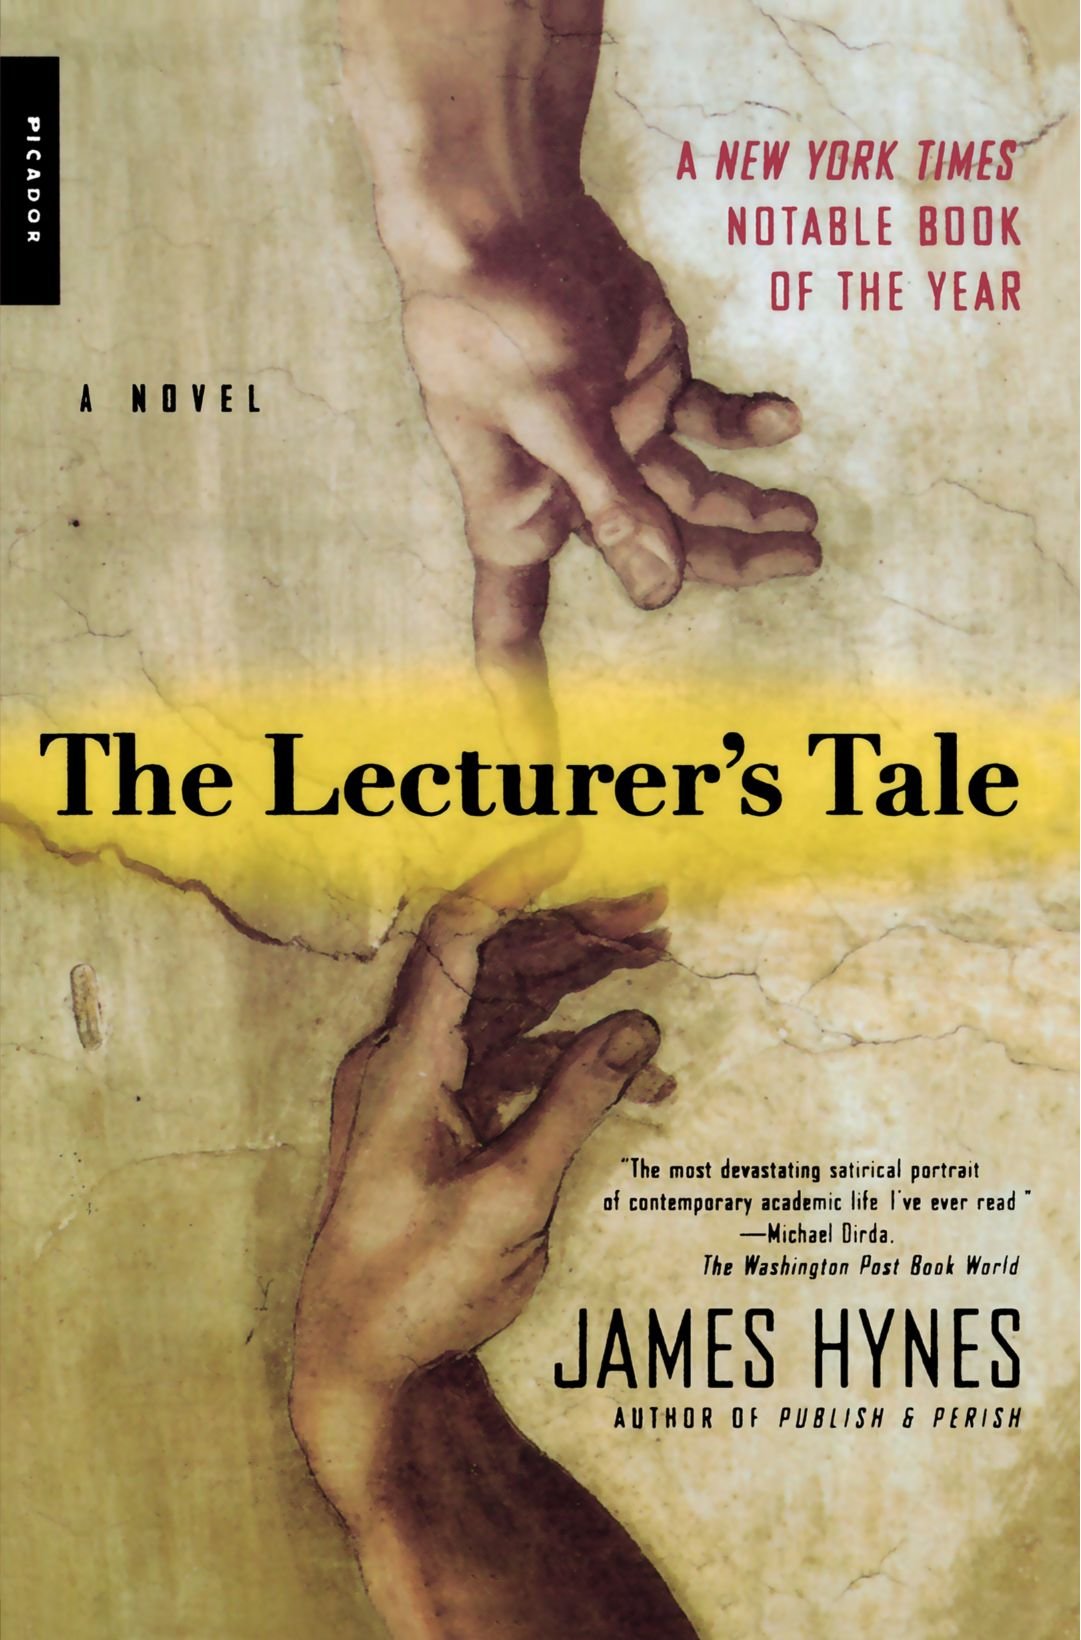 The lecturer's tale